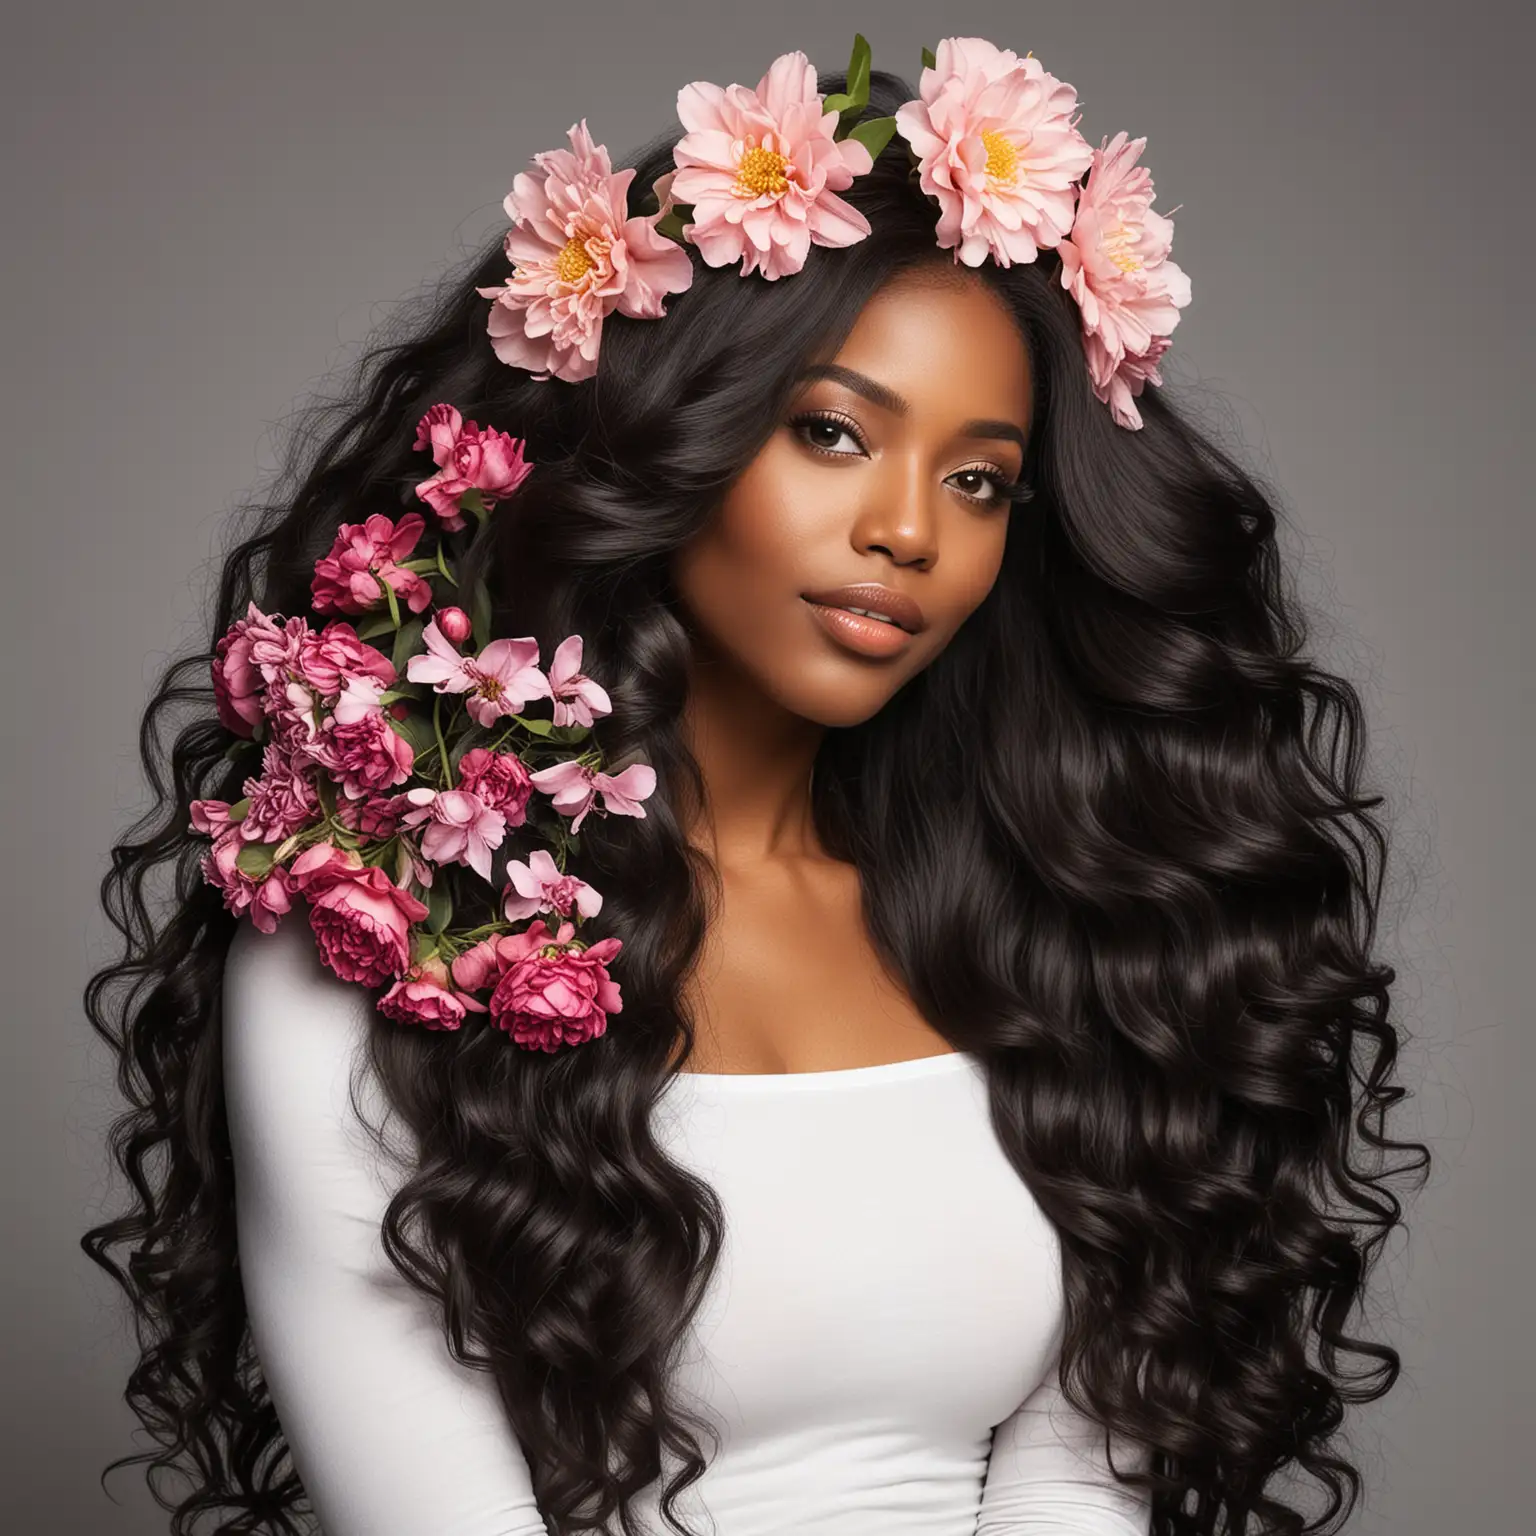 Stunning Black Woman with Elegant Long Hair and Floral Adornments